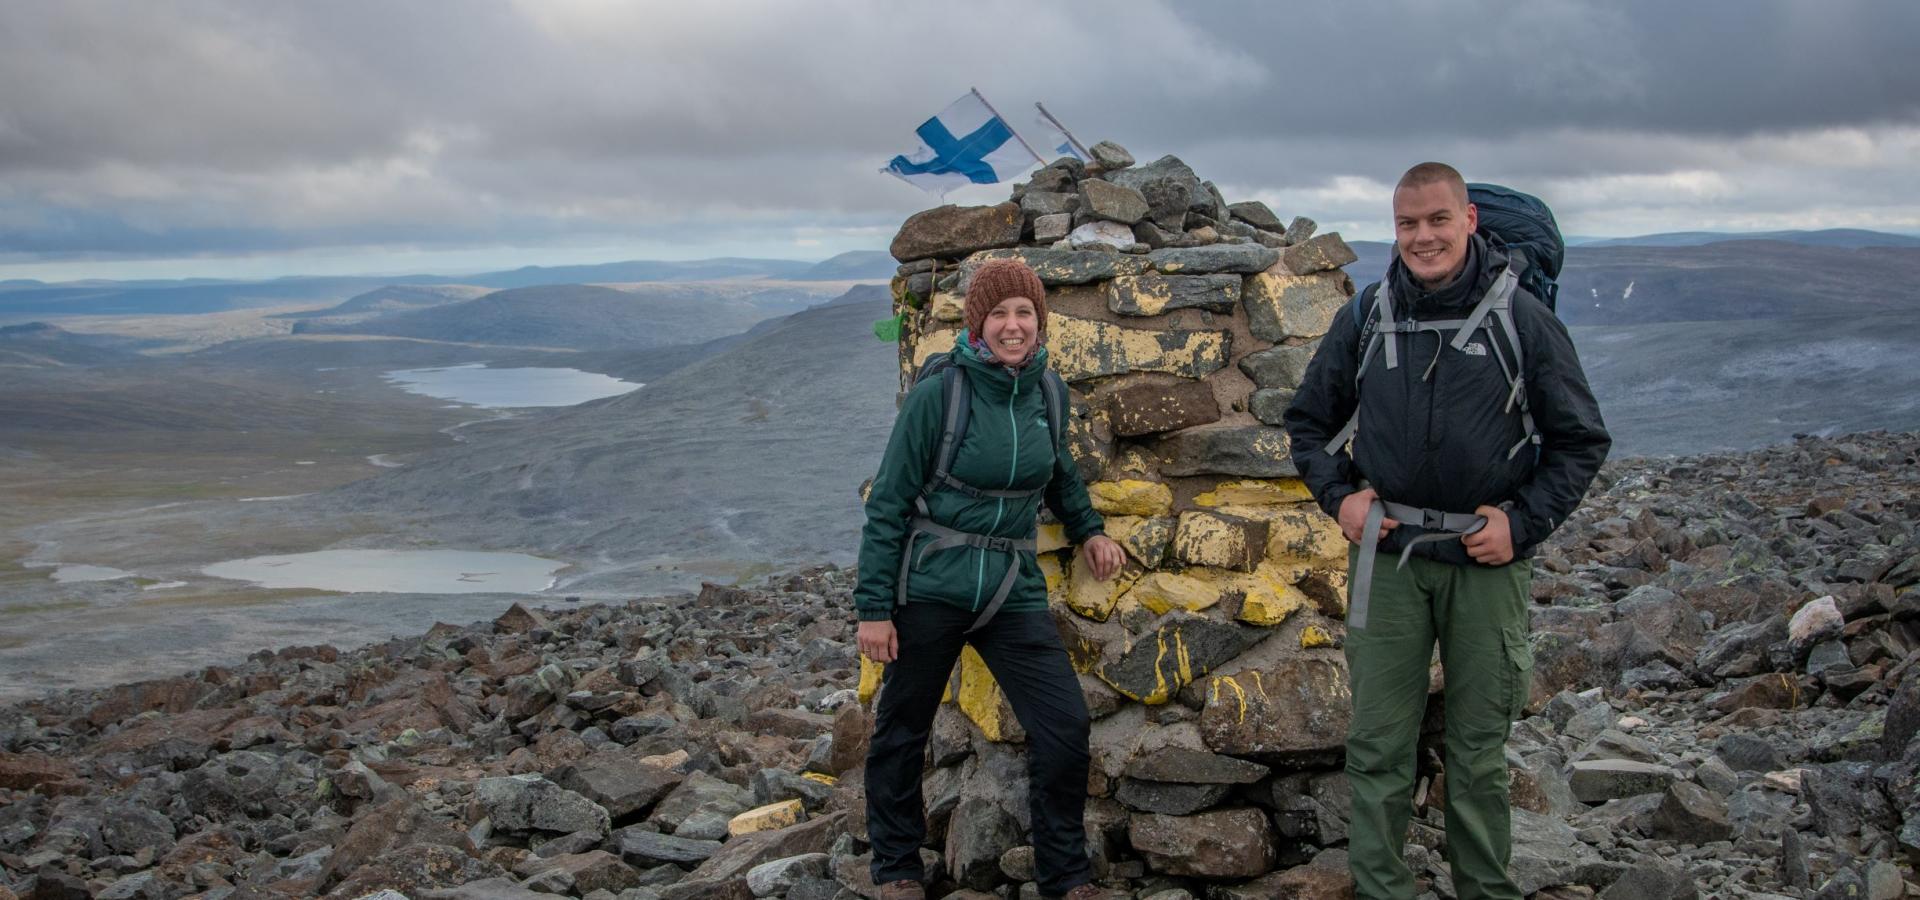 Two hikers by the cairn at Halti, with a view towards some lakes